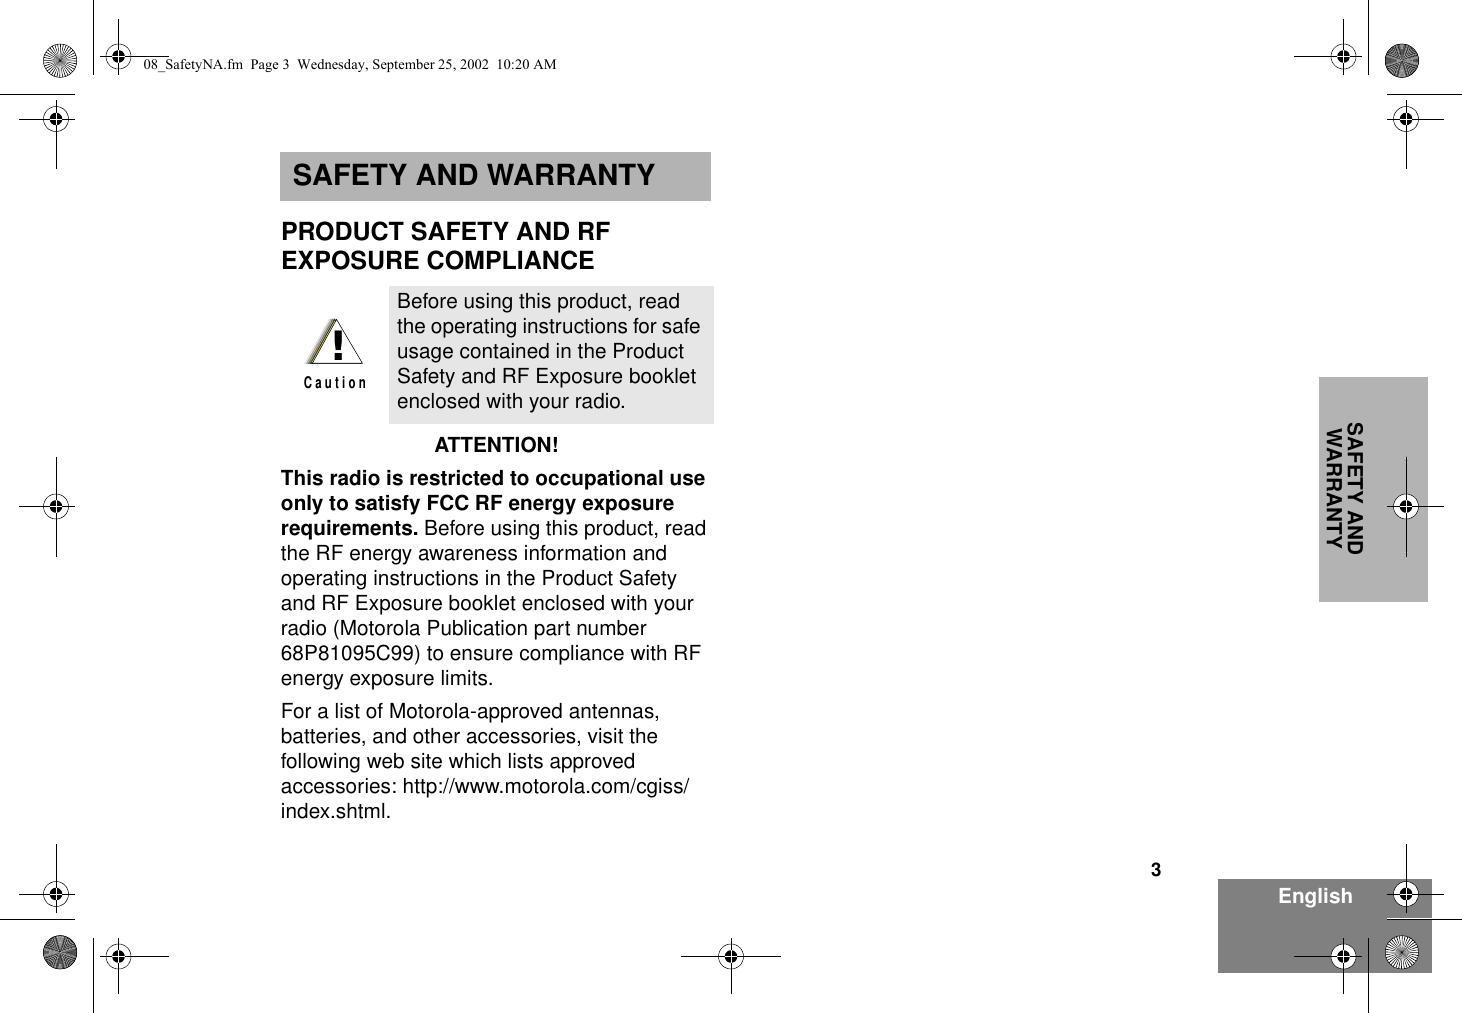 3EnglishSAFETY AND WARRANTYSAFETY AND WARRANTYPRODUCT SAFETY AND RF EXPOSURE COMPLIANCEATTENTION!  This radio is restricted to occupational use only to satisfy FCC RF energy exposure requirements. Before using this product, read the RF energy awareness information and operating instructions in the Product Safety and RF Exposure booklet enclosed with your radio (Motorola Publication part number 68P81095C99) to ensure compliance with RF energy exposure limits.  For a list of Motorola-approved antennas, batteries, and other accessories, visit the following web site which lists approved accessories: http://www.motorola.com/cgiss/index.shtml.Before using this product, read the operating instructions for safe usage contained in the Product Safety and RF Exposure booklet enclosed with your radio.!C a u t i o n08_SafetyNA.fm  Page 3  Wednesday, September 25, 2002  10:20 AM